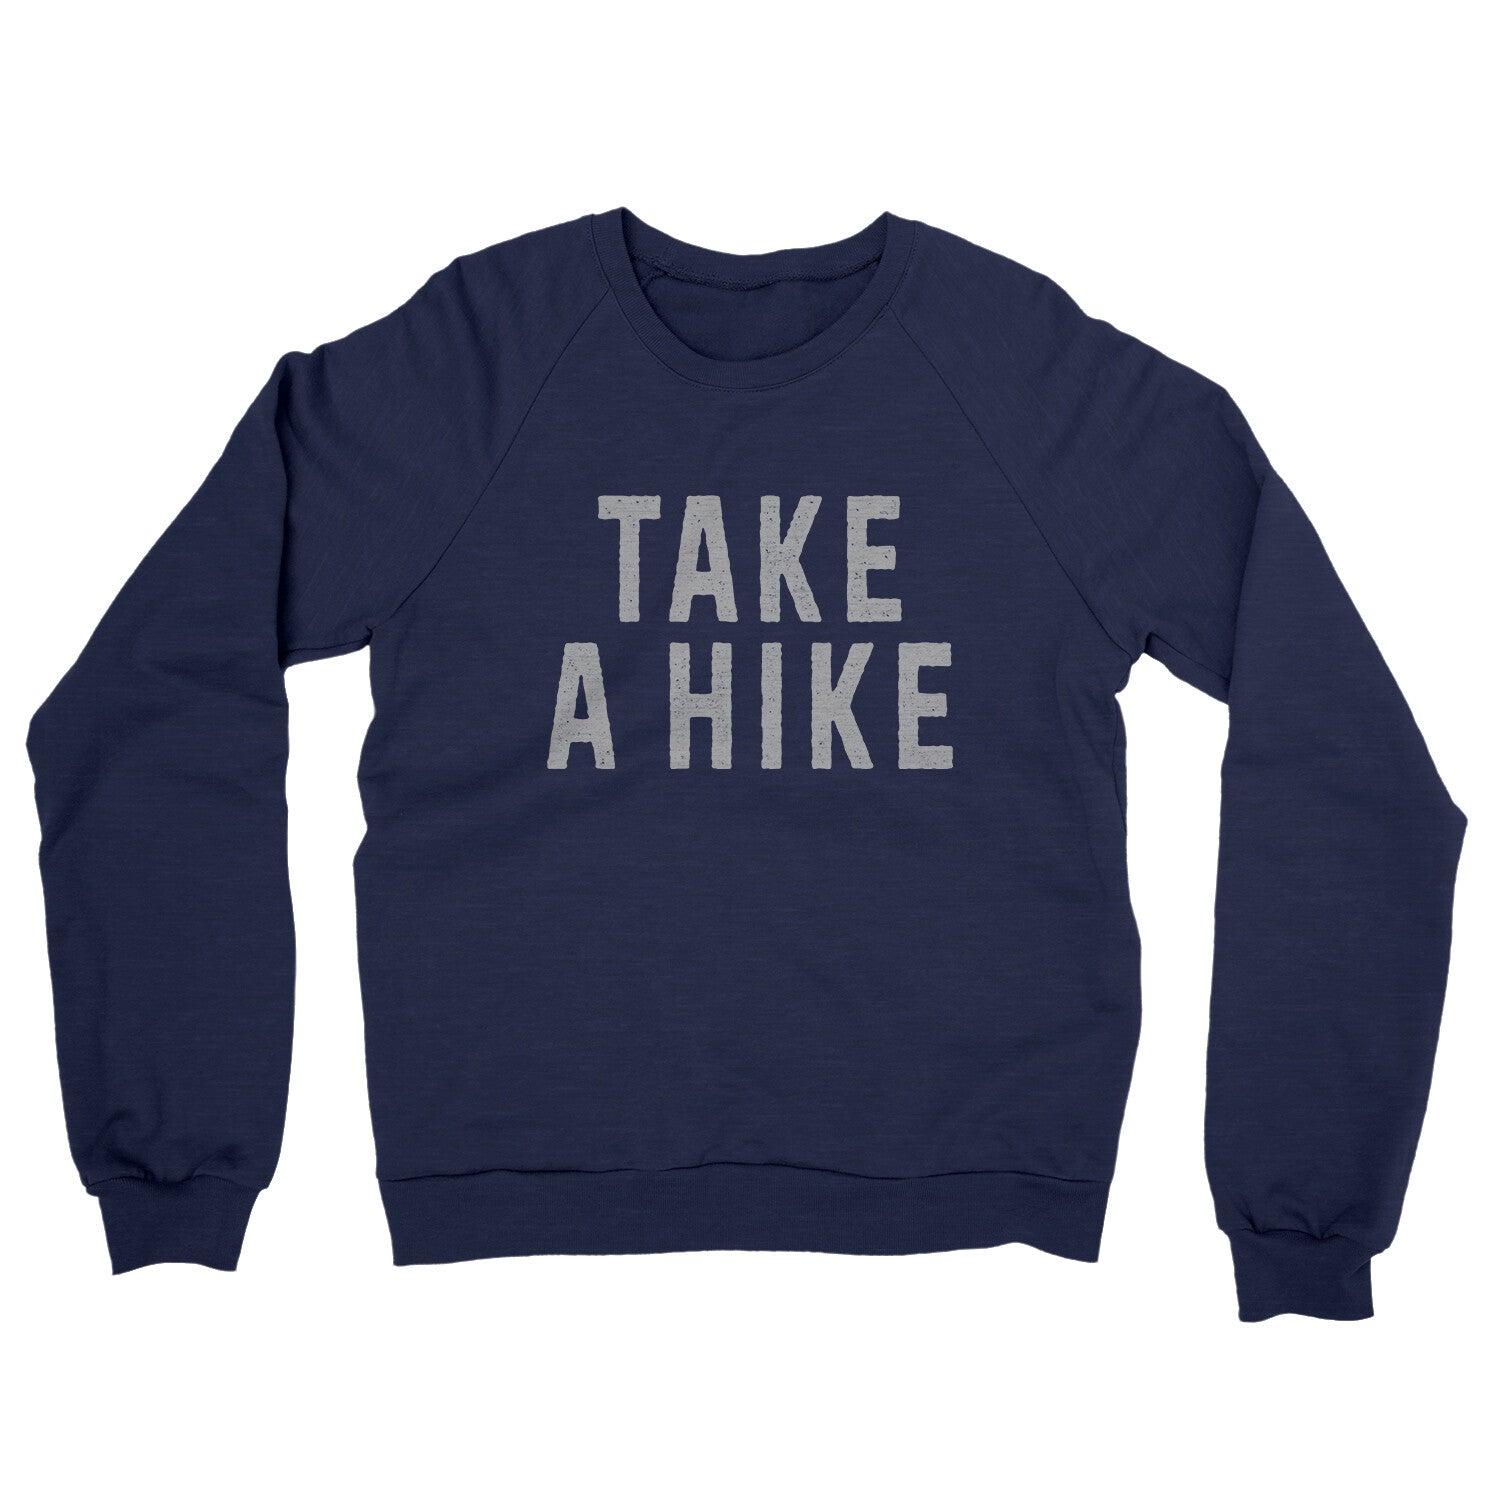 Take a Hike in Navy Color